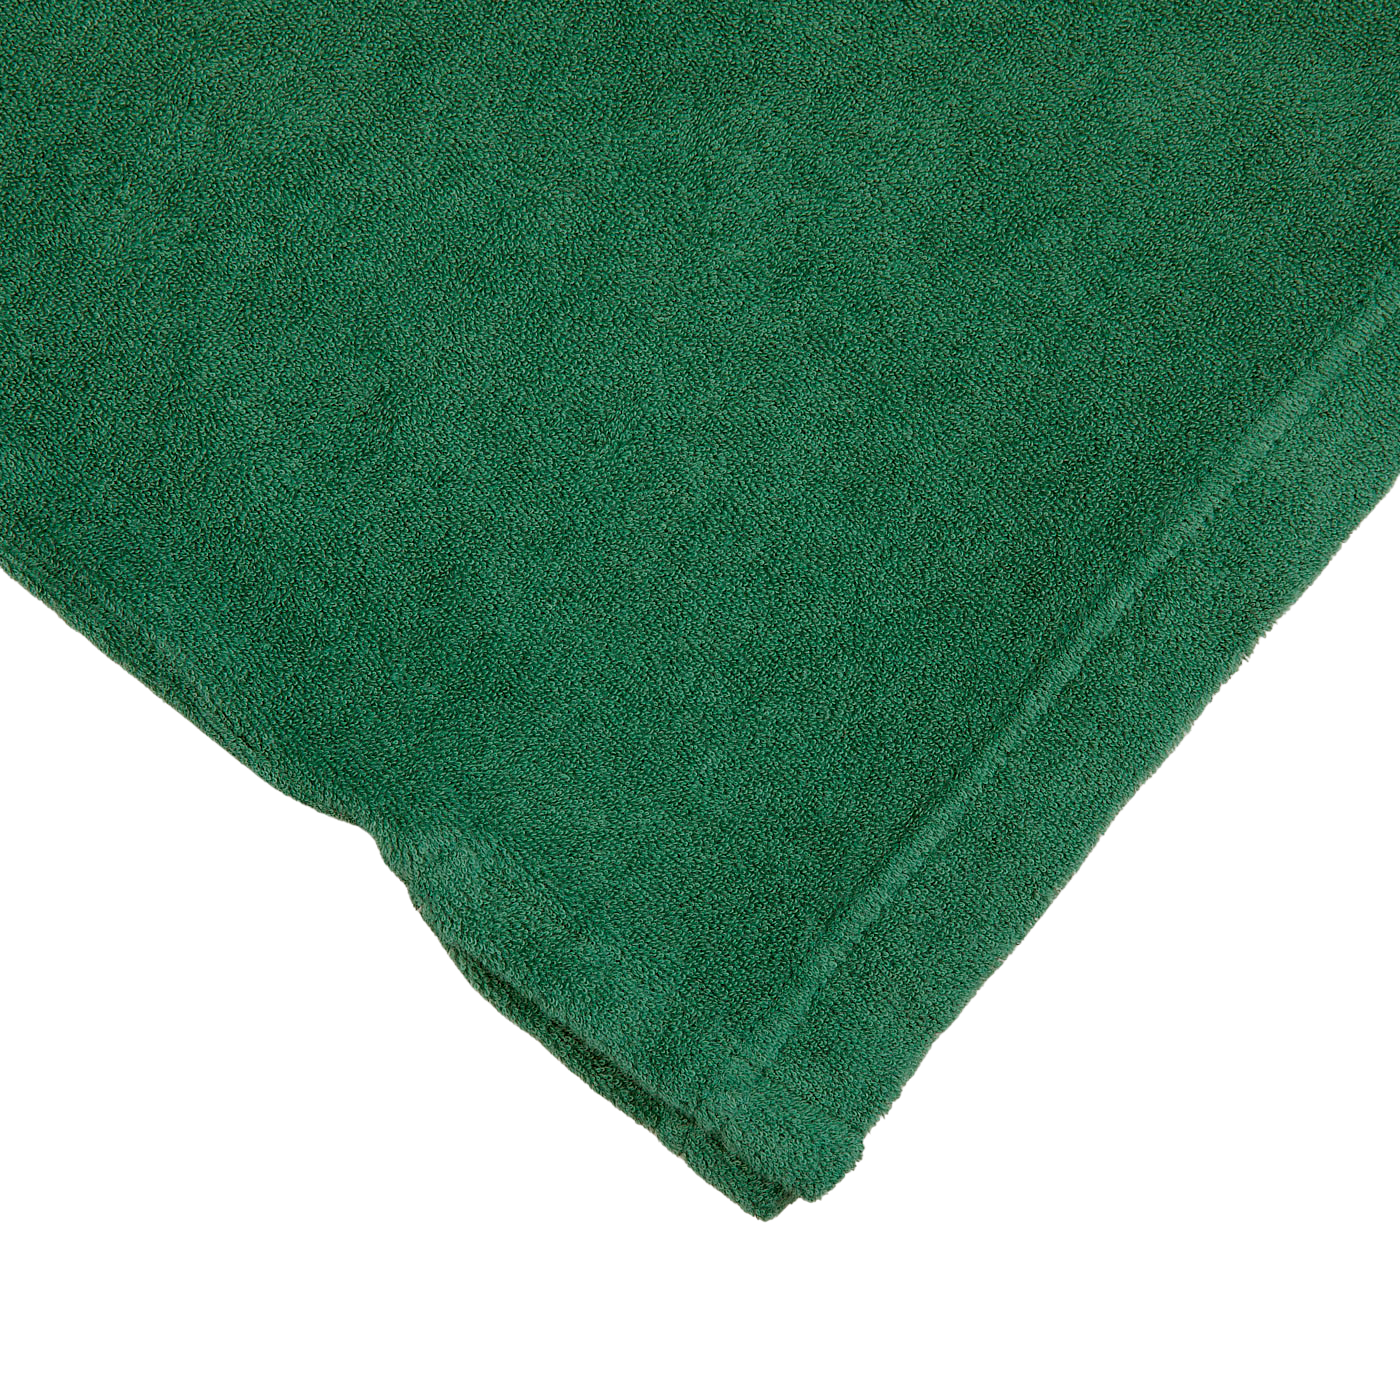 A Grass Green Cotton Towelling Polo Shirt folded on top of a white surface made of towelling cotton, by Fedeli.